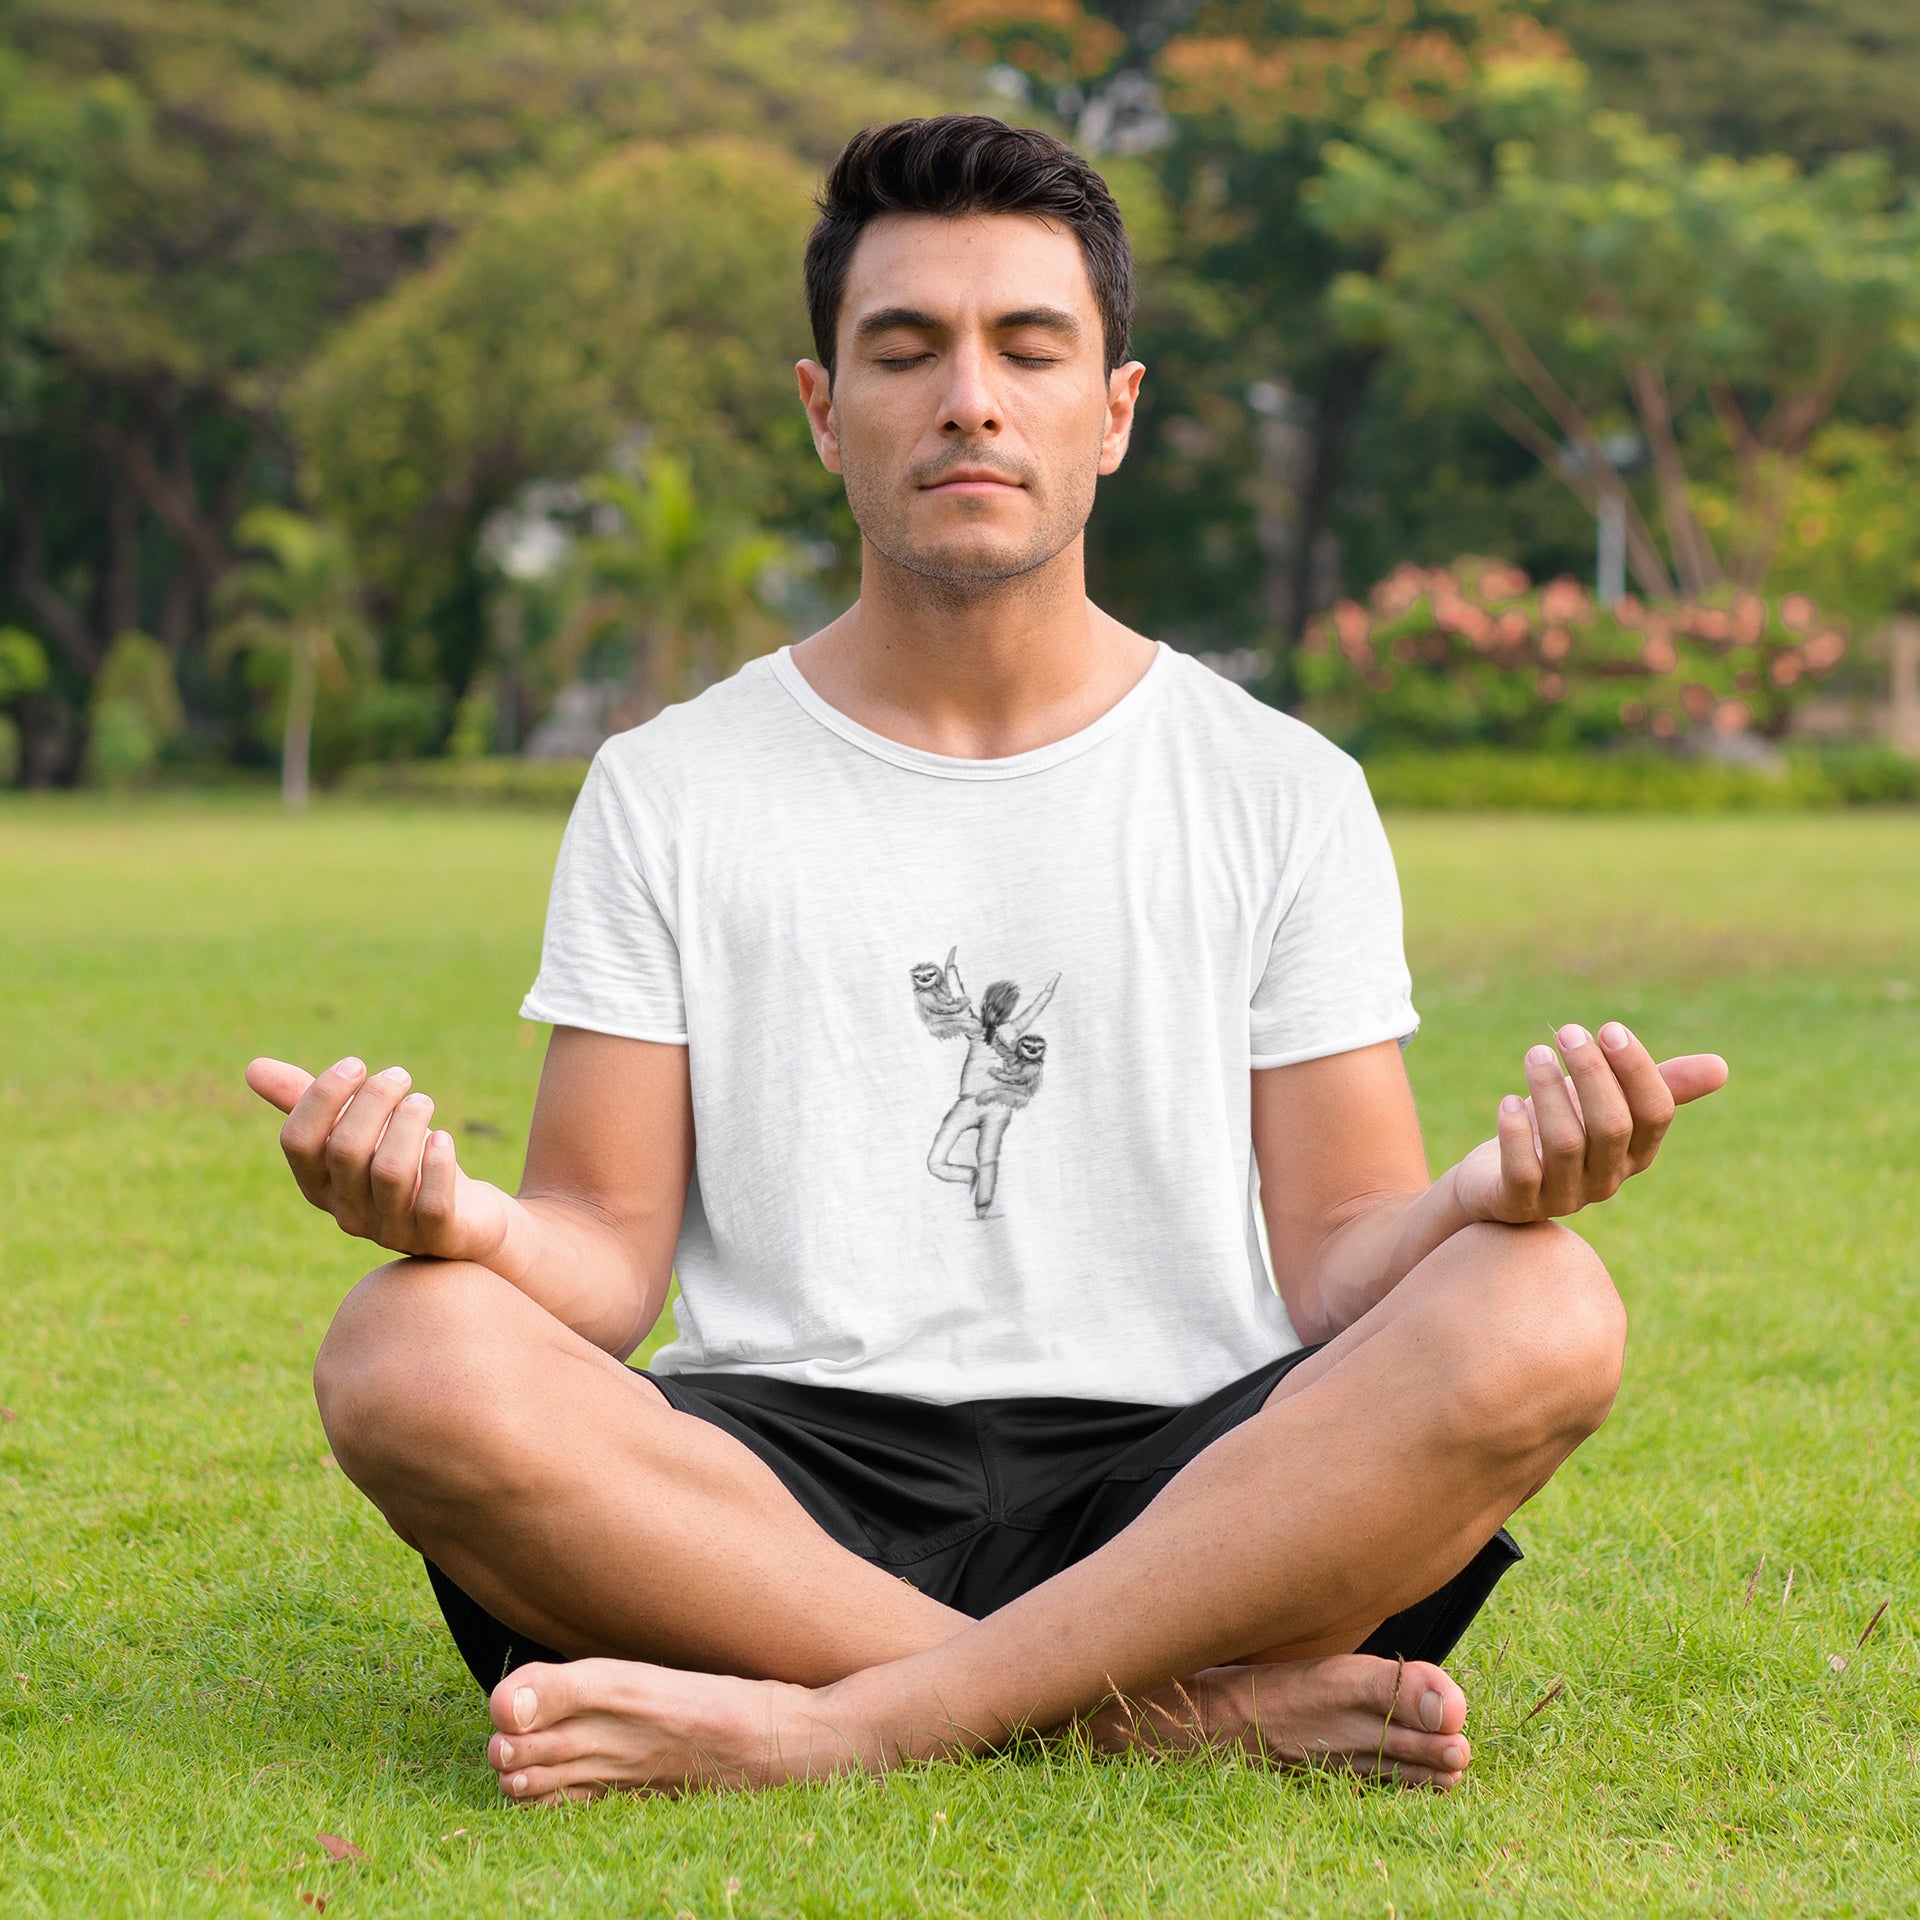 Sloth Yoga | 100% Organic Cotton T Shirt worn by a man in the park